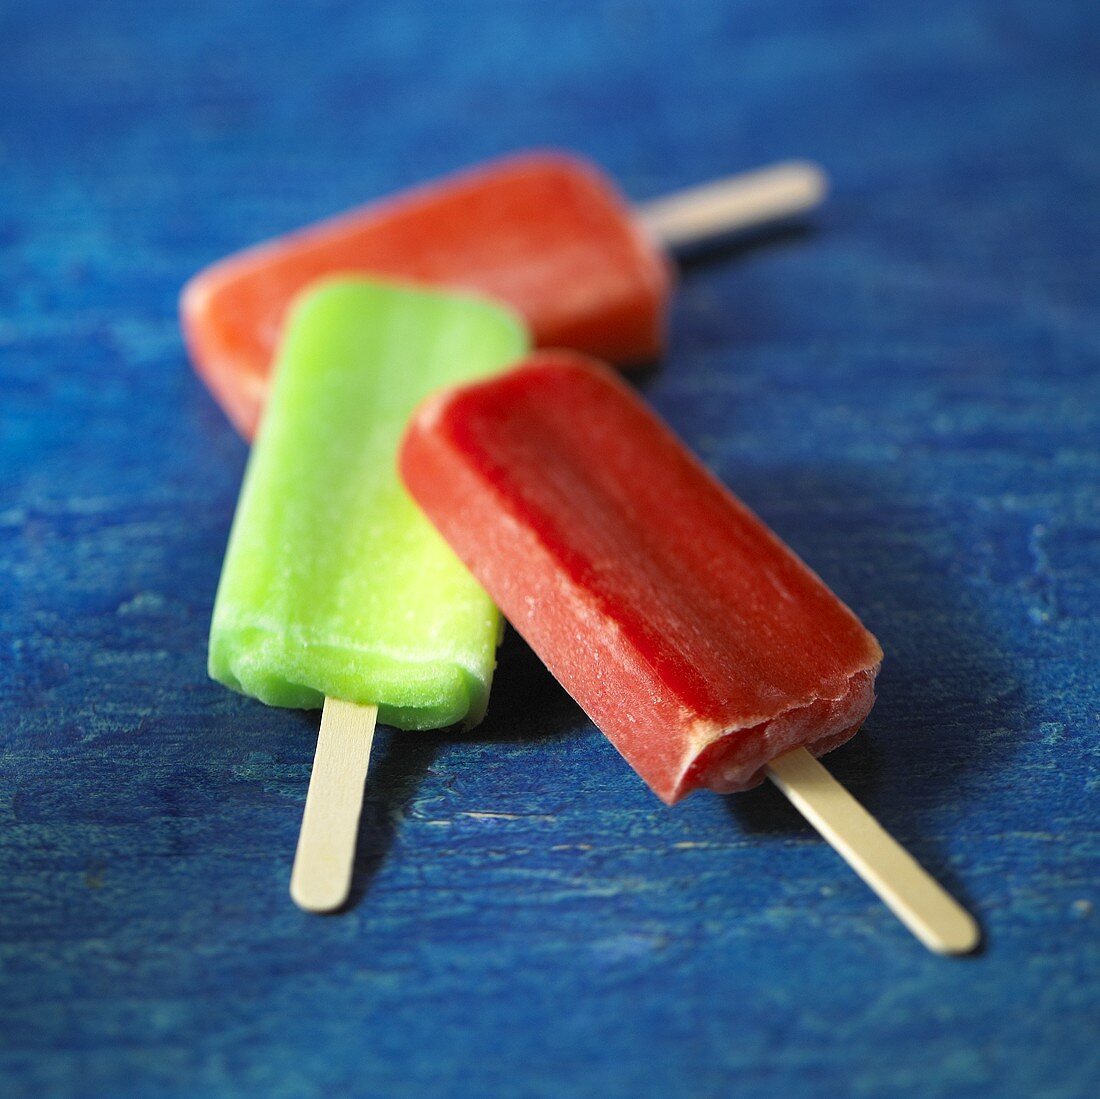 Three Fruit Flavored Popsicles on Blue Background